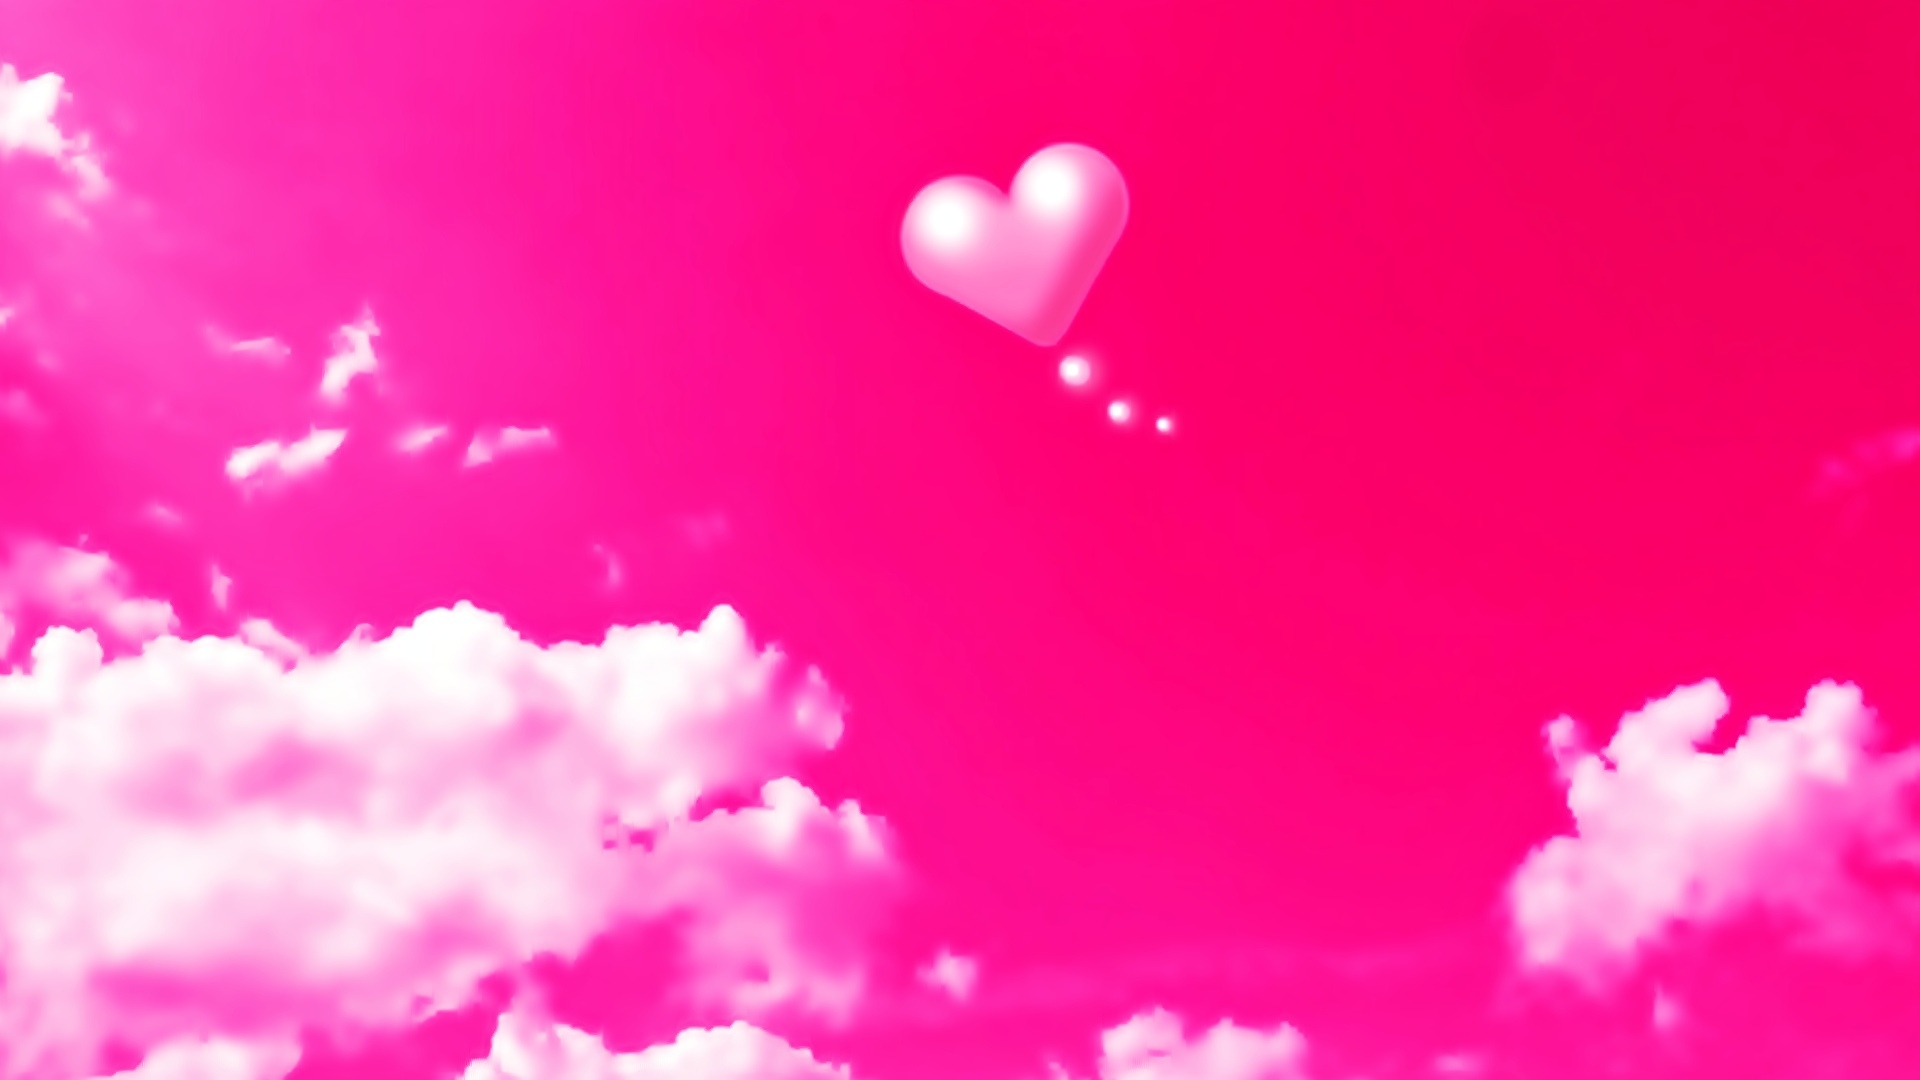 35 High Definition Pink Wallpapers/Backgrounds For Free Download.